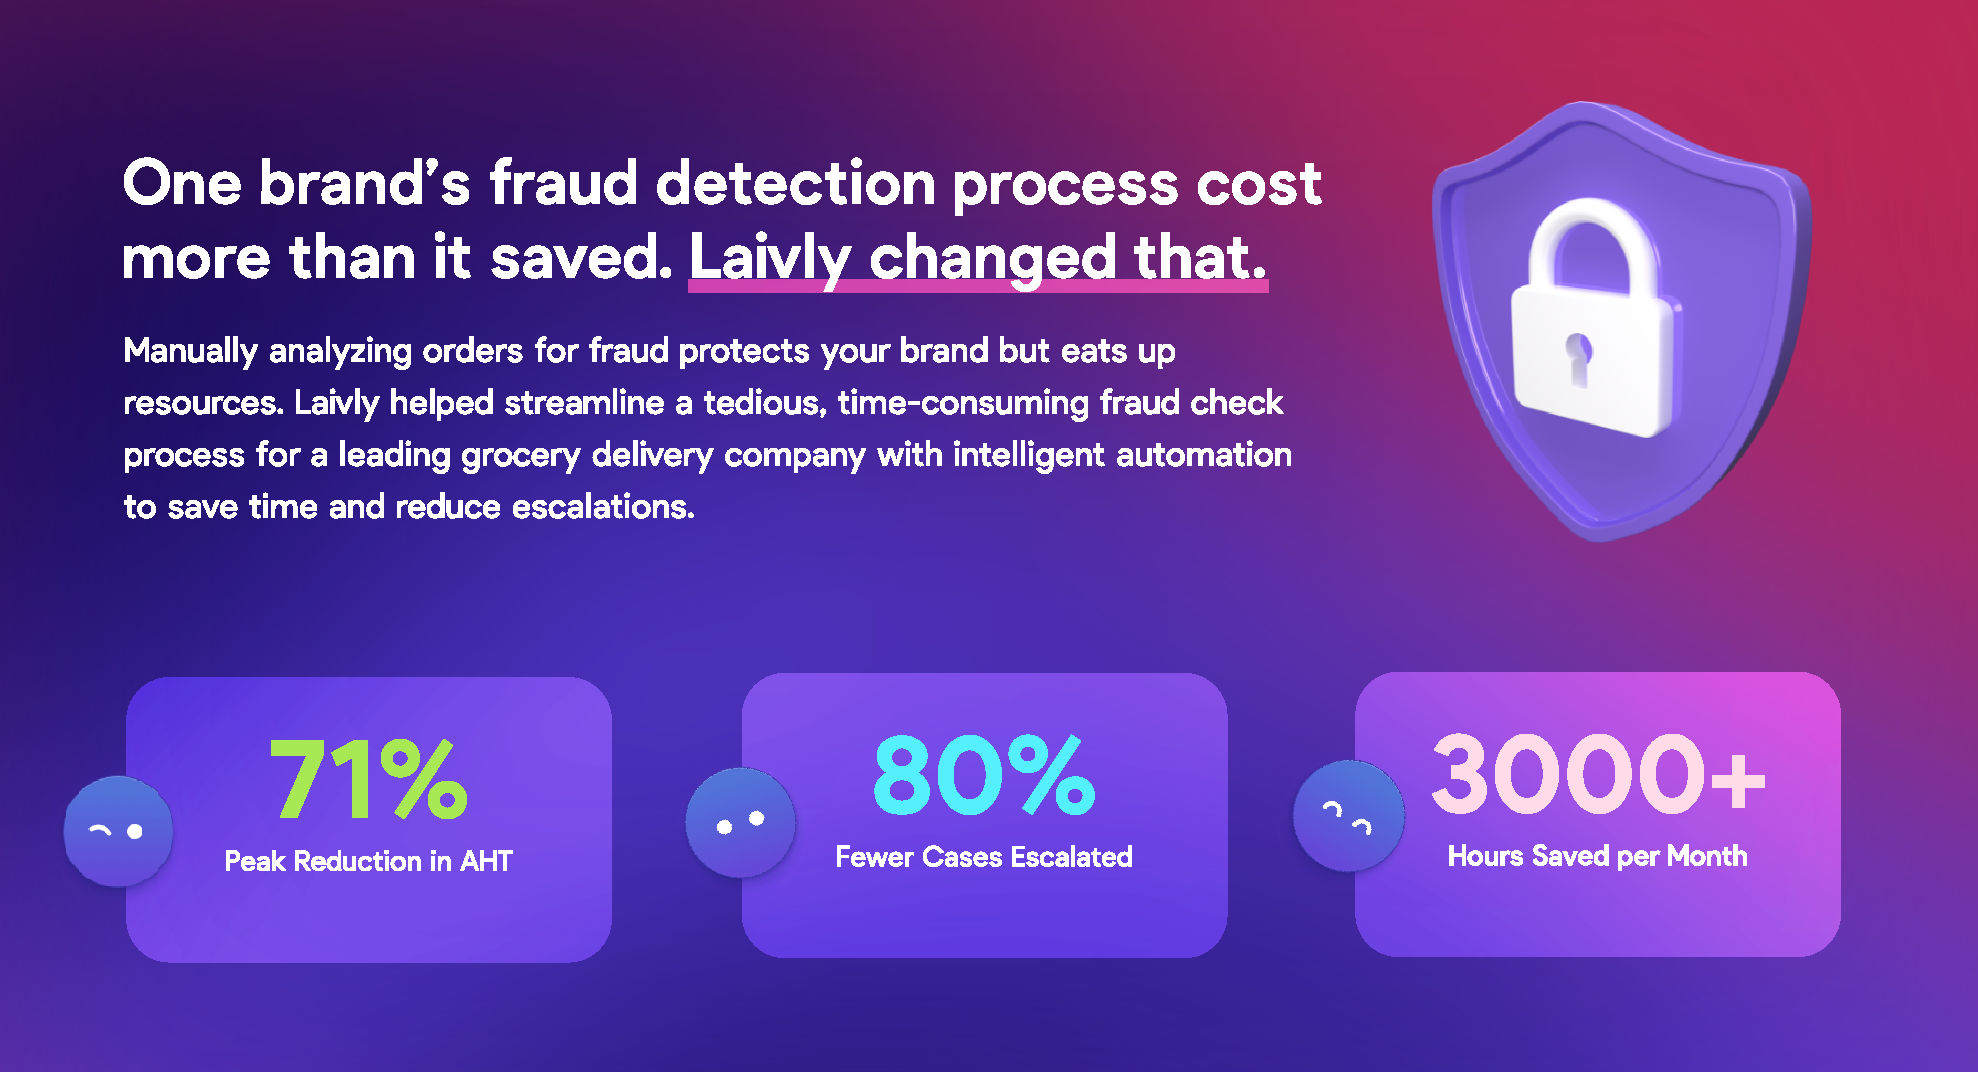 One Brand's fraud detection process cost more than it saved. Laivly changed that.